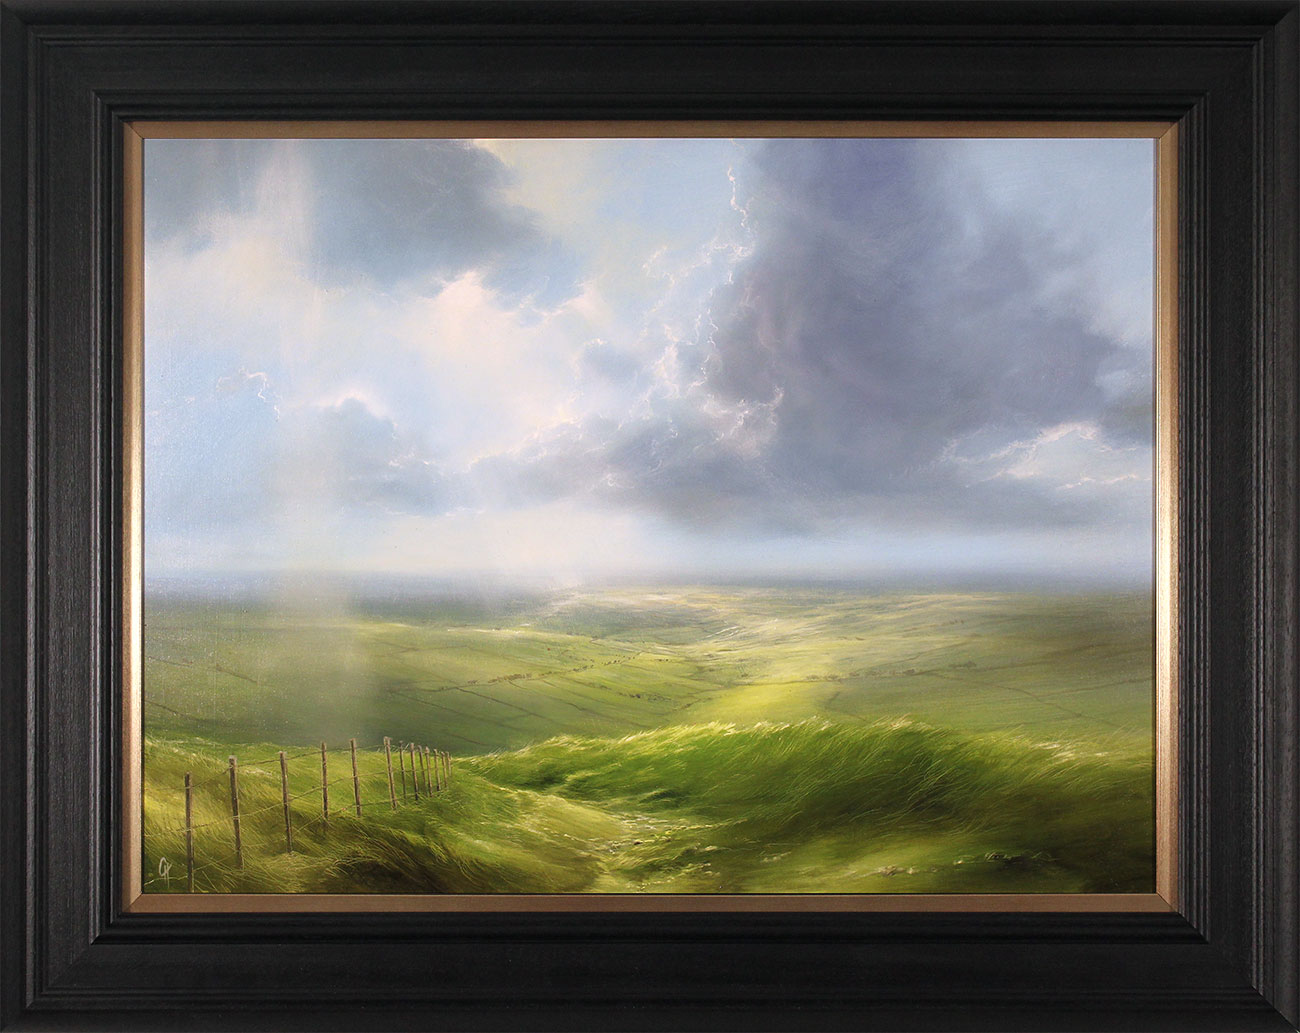 Clare Haley, Original oil painting on panel, A Fine Way to Spend the Day, click to enlarge